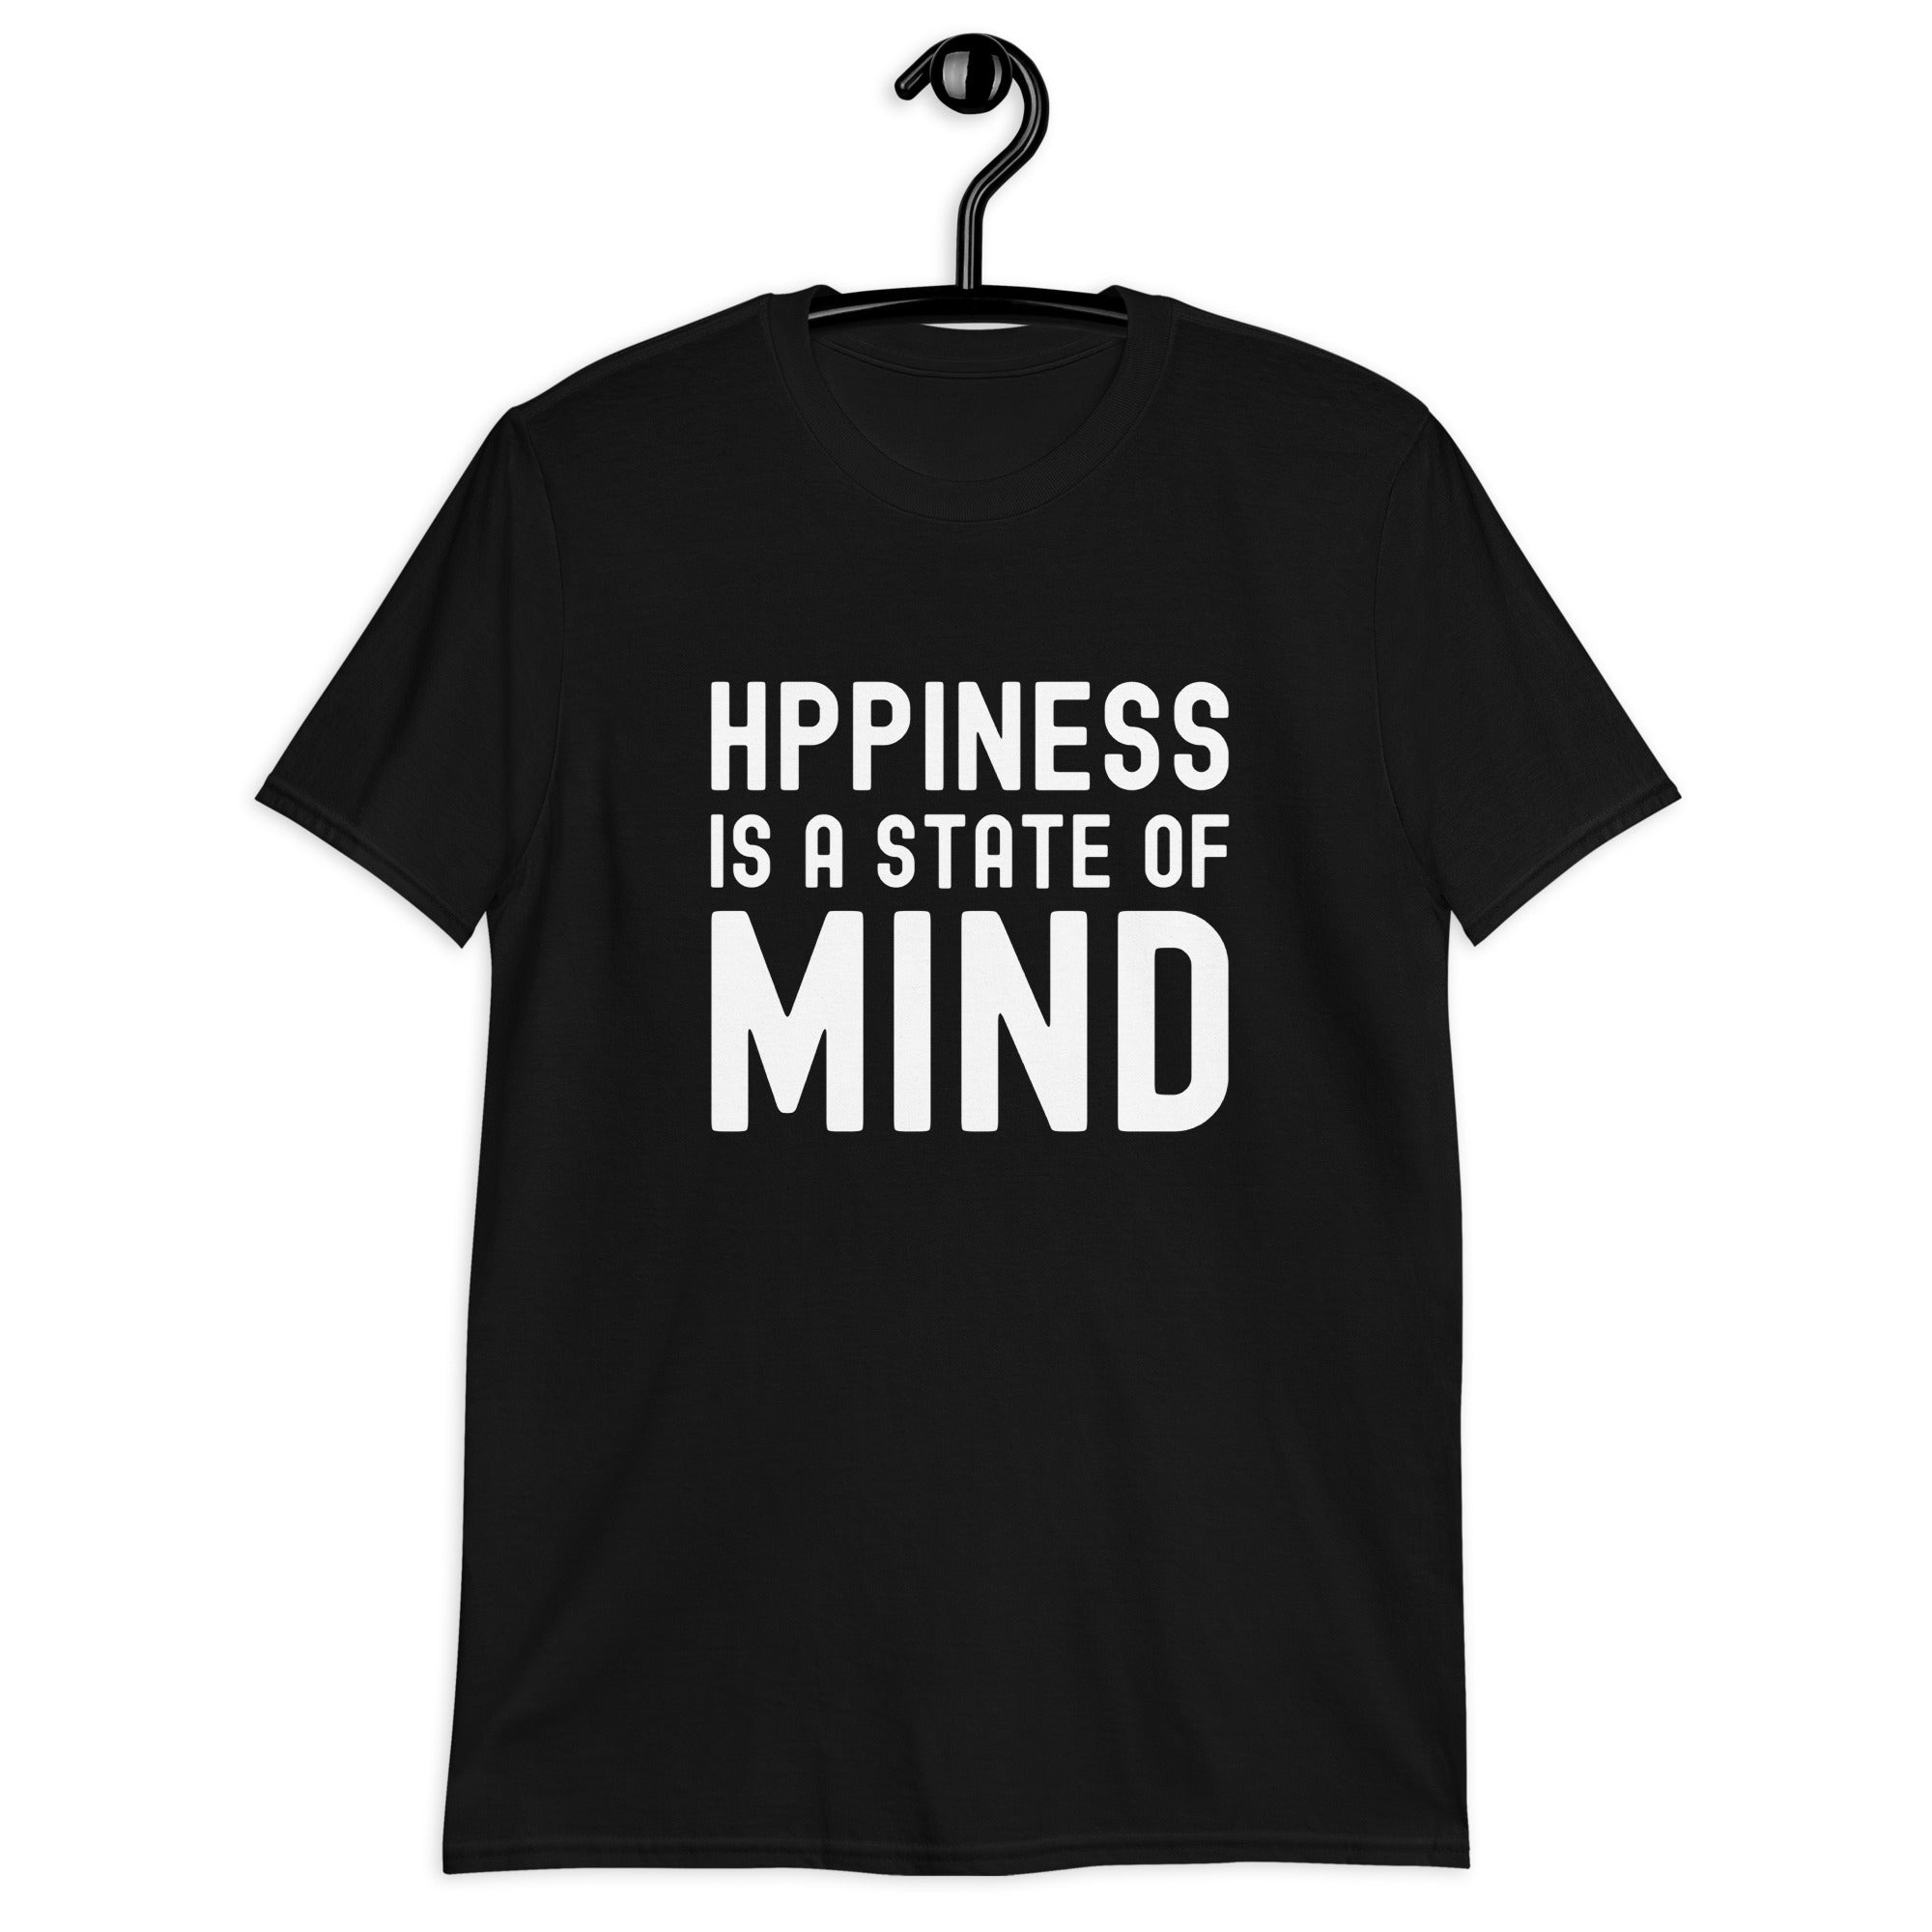 Short-Sleeve Unisex T-Shirt | Hppiness is a state of mind